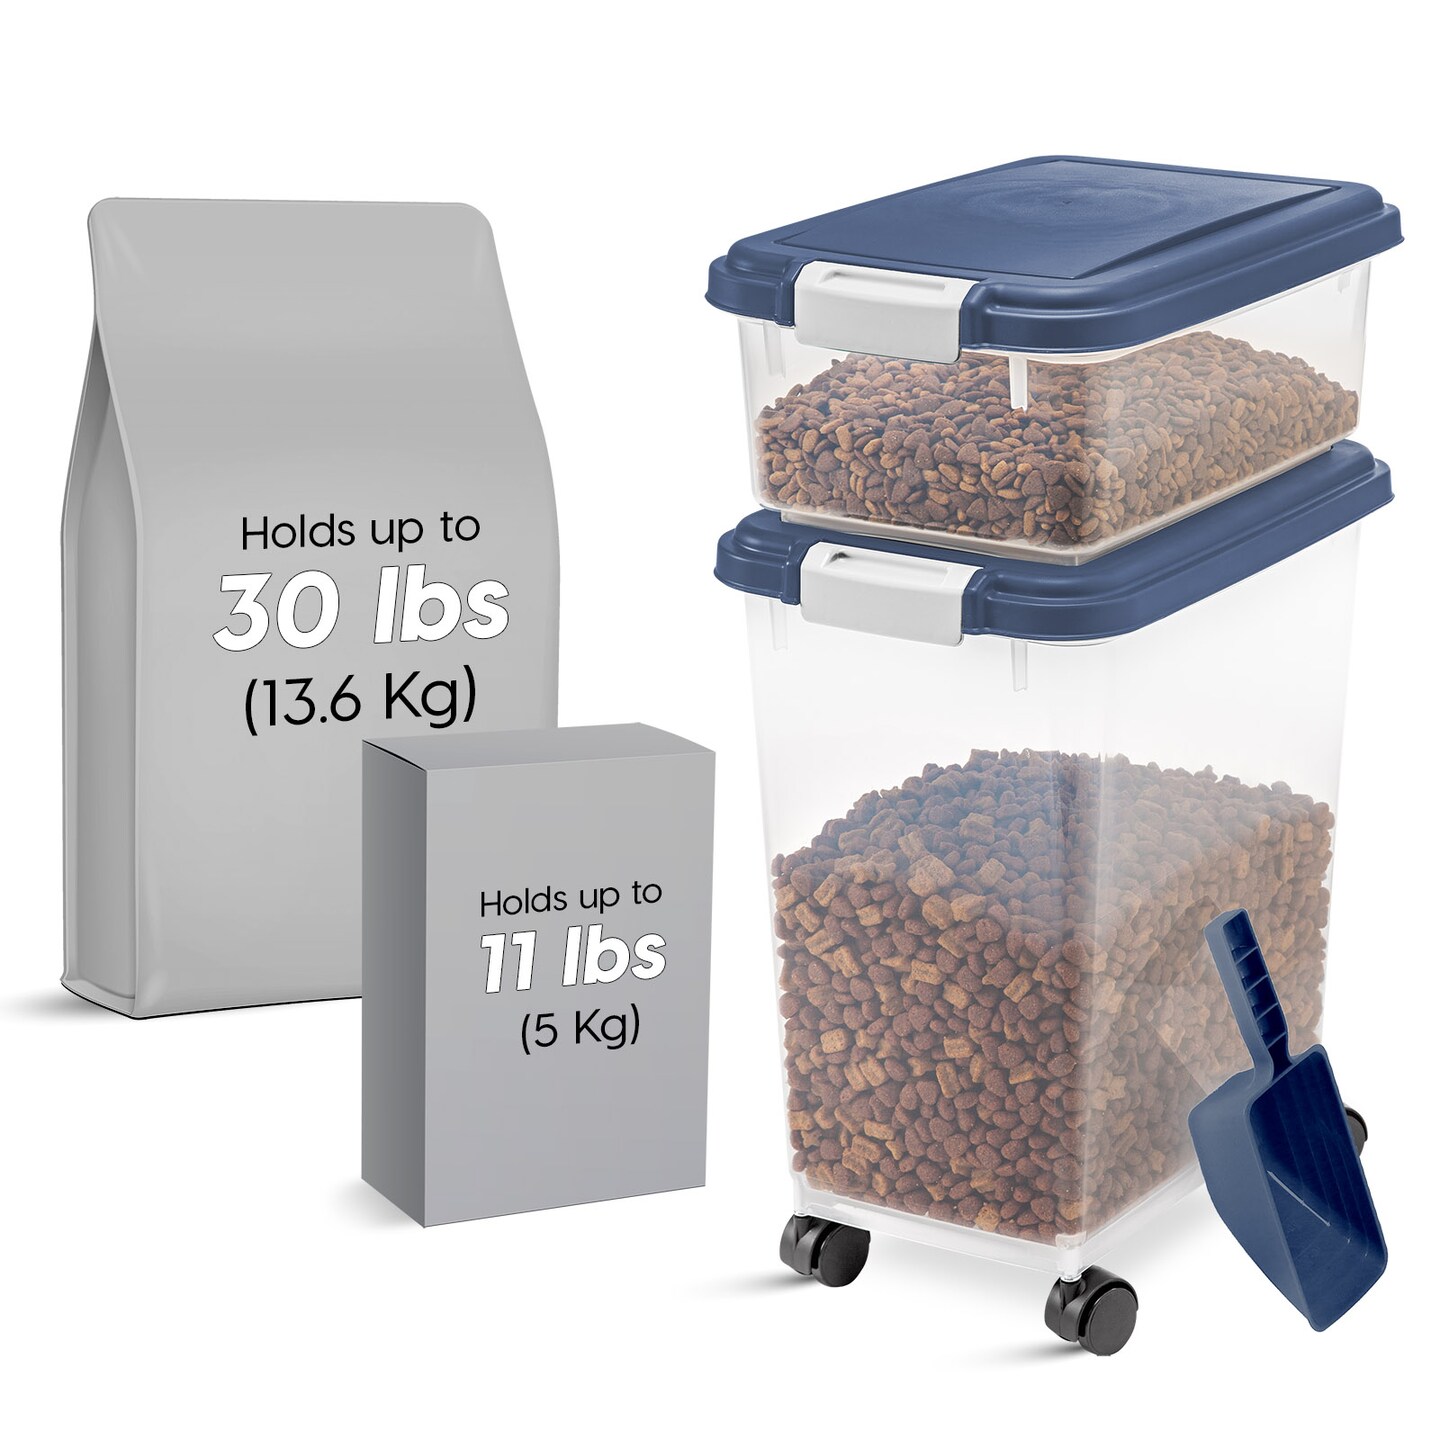 IRIS USA 30lbs+11lbs Airtight Pet Food Storage Container Combo with Scoop and Casters, up to 41lbs